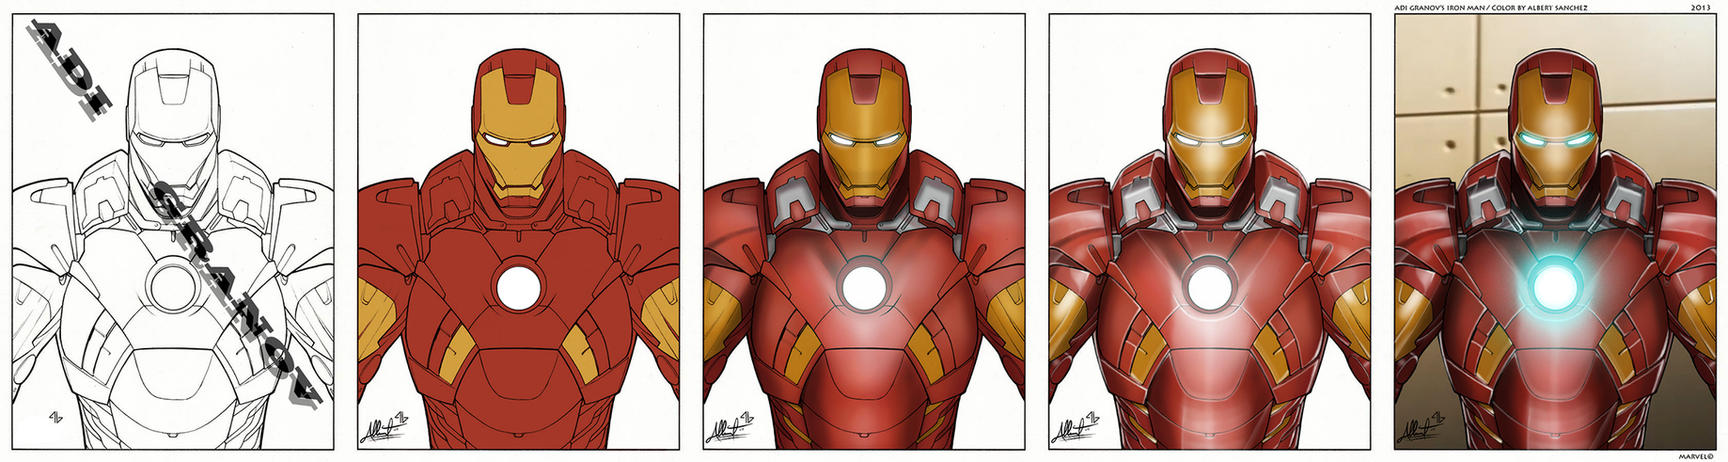 iron_man_color_process_by_exeryus-d612zl7.jpg